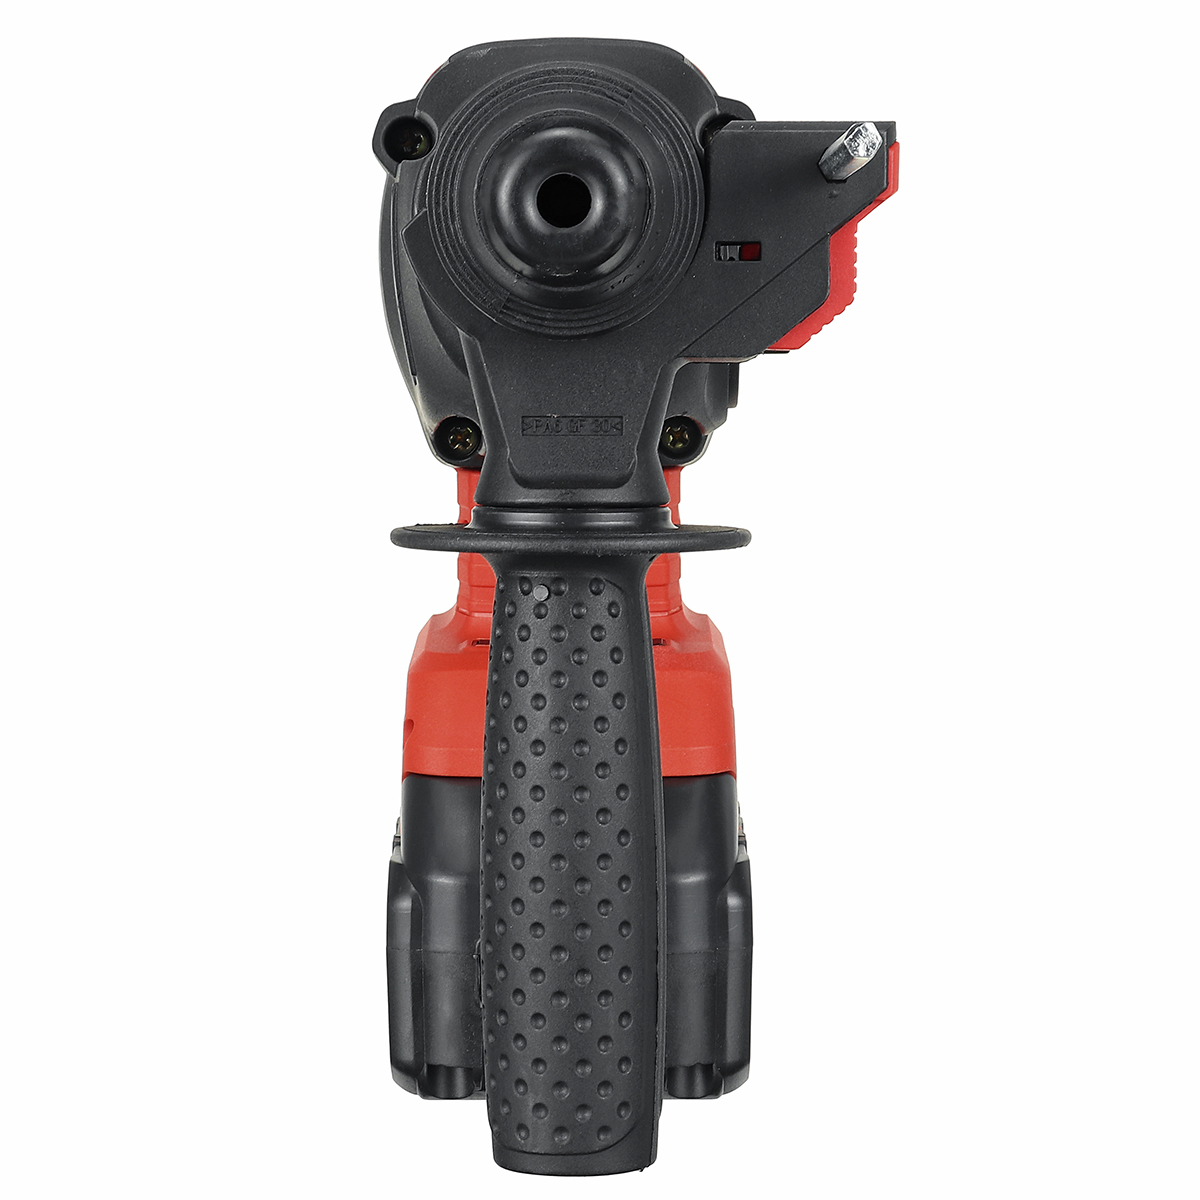 Find Doersupp 588VF Cordless Brushless Rechargeable Electric Hammer Electric Drill Household W/1pc/2pcs Battery EU/US Plug Fit MakitaBattery for Sale on Gipsybee.com with cryptocurrencies